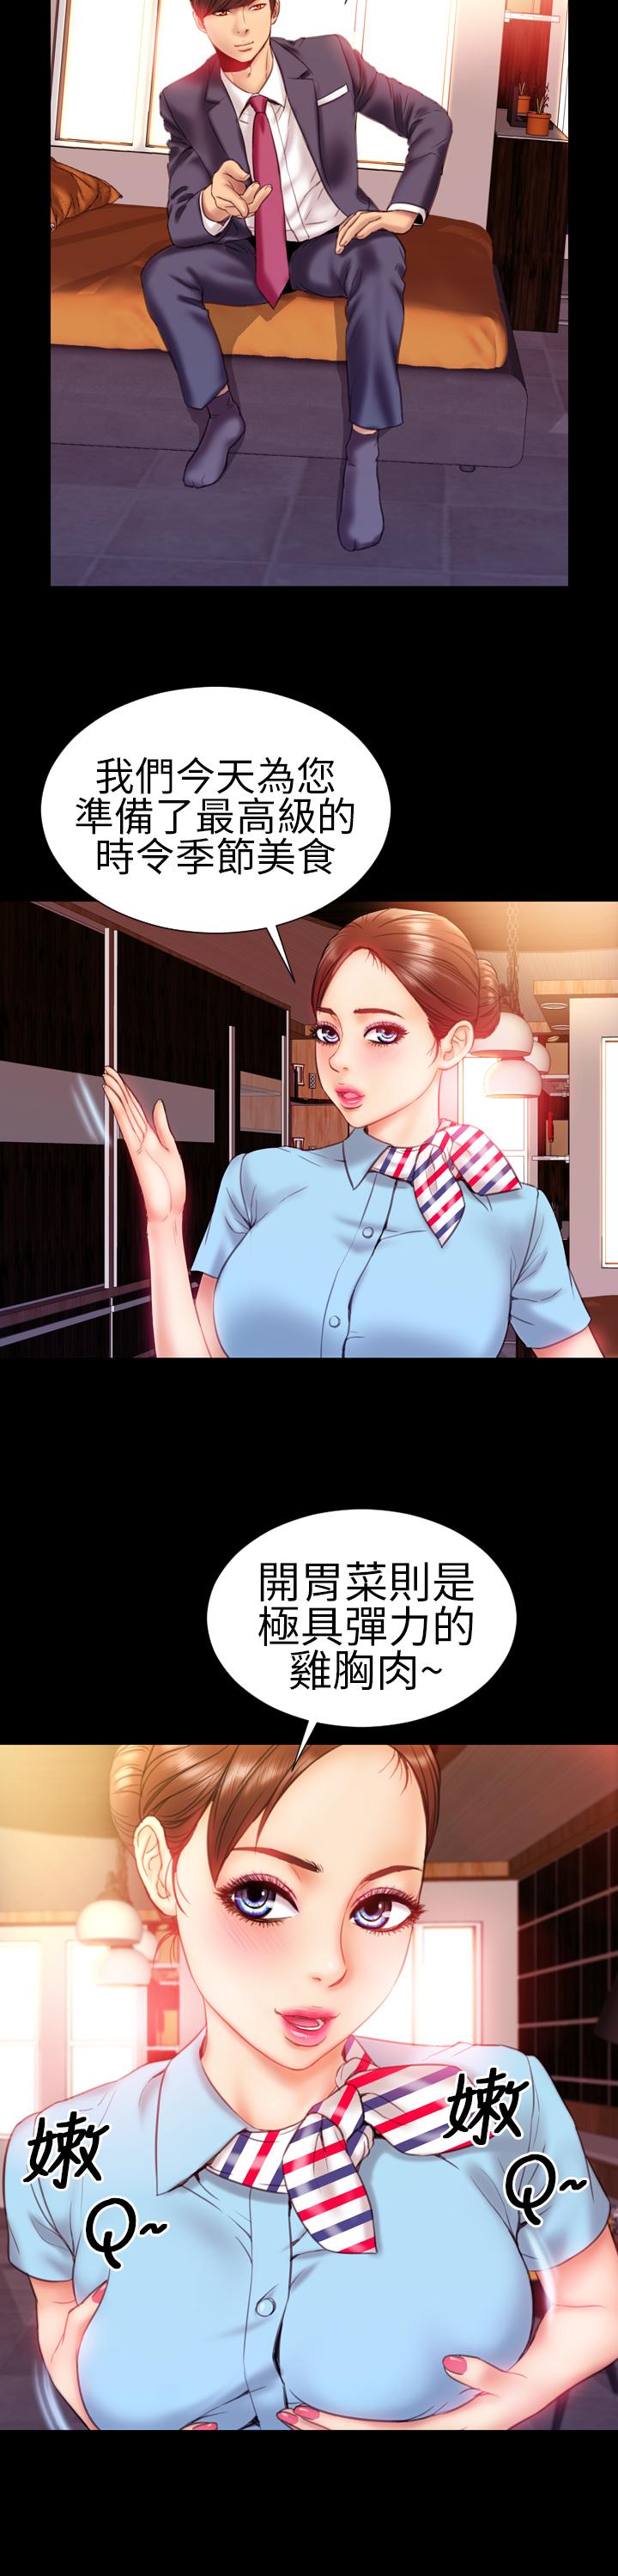 MY WIVES (淫蕩的妻子們) Ch.1 (Chinese) 2